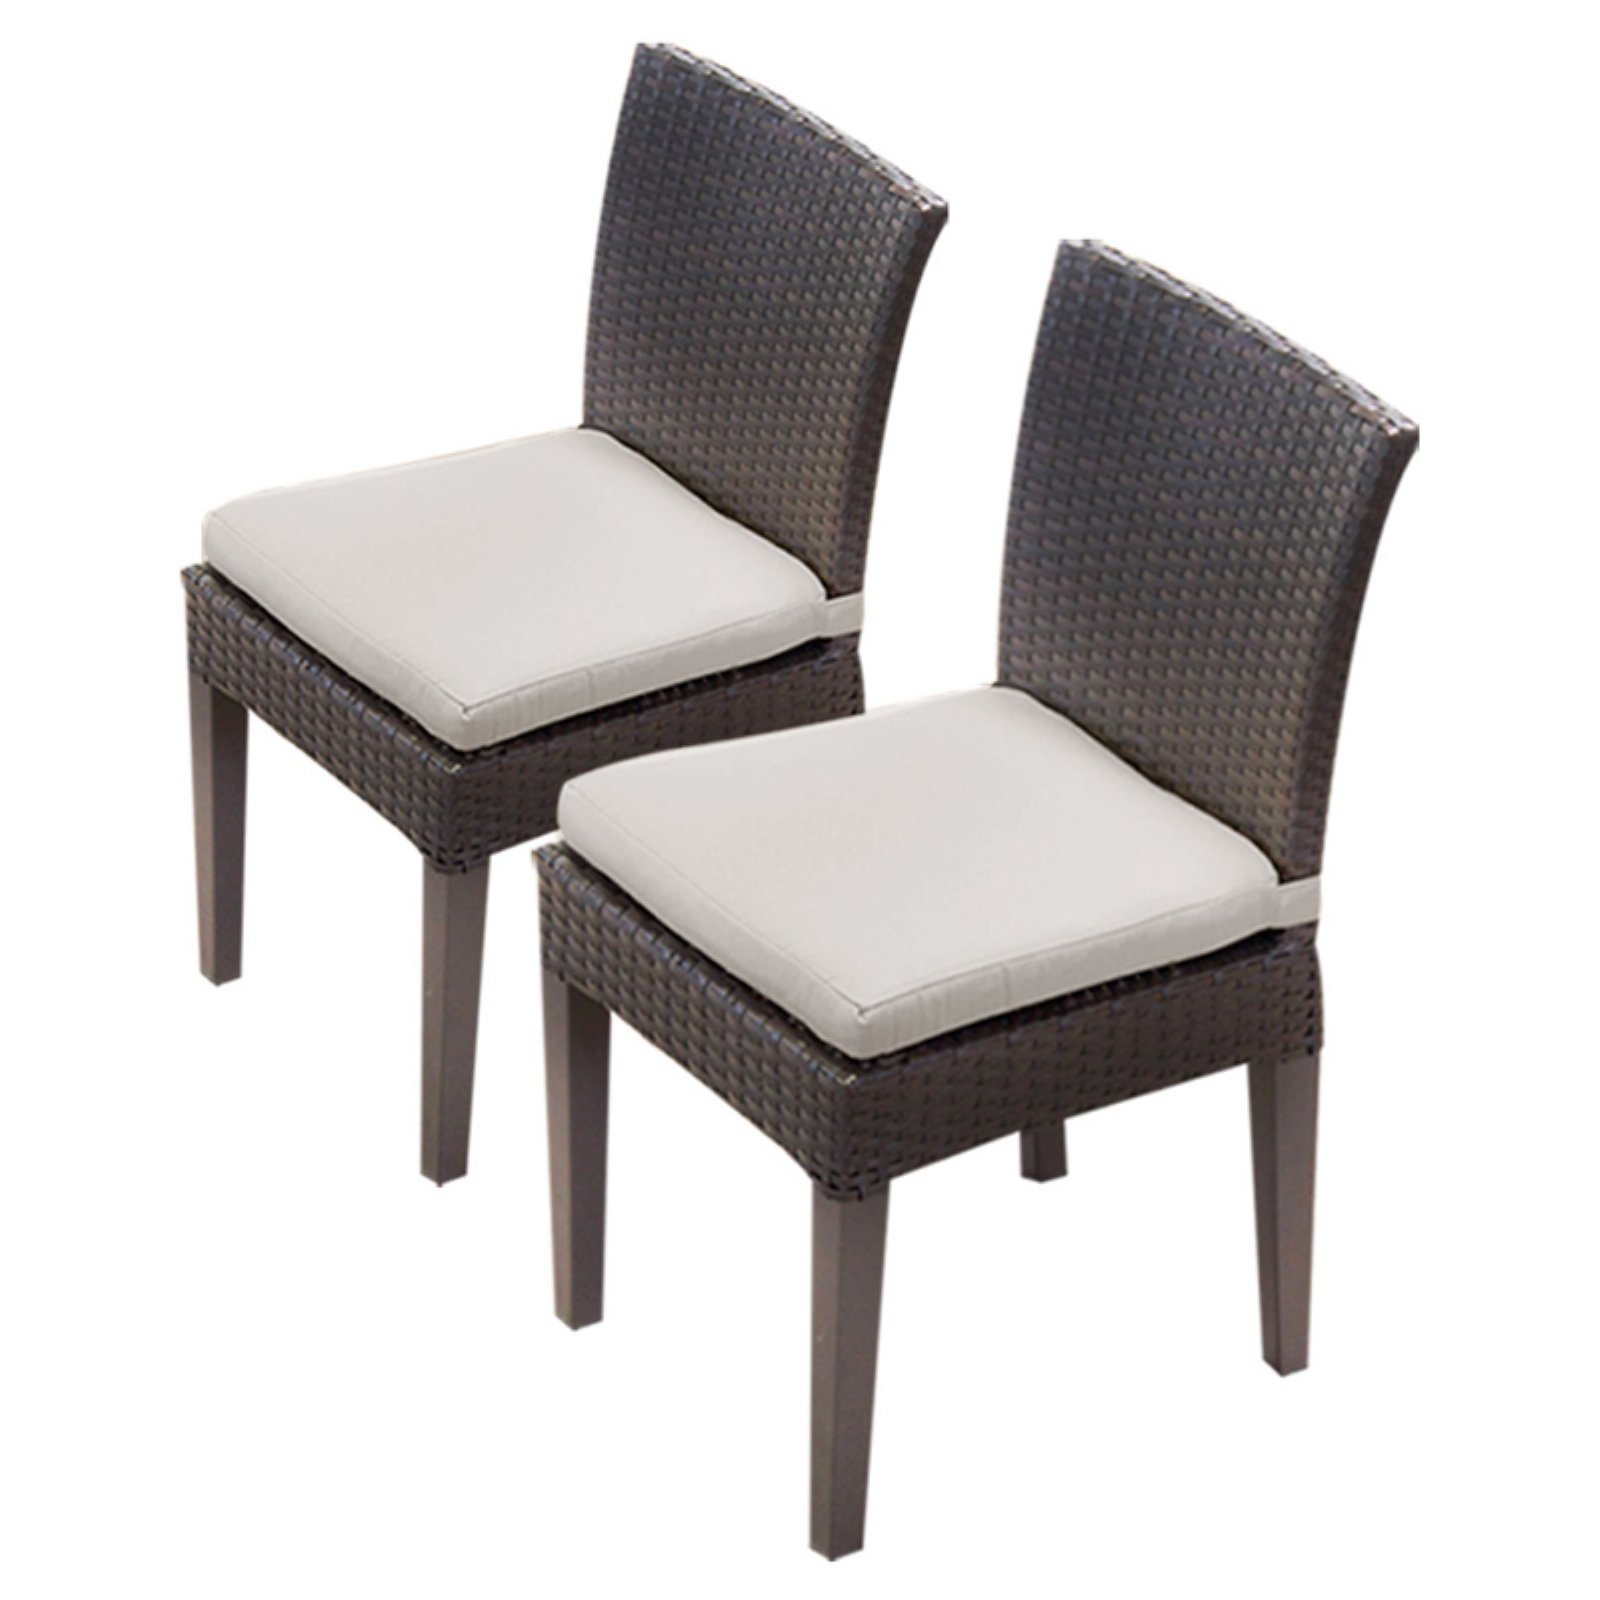 TK Classics Napa Outdoor Dining Side Chair with 2 Cushion Covers - image 1 of 2